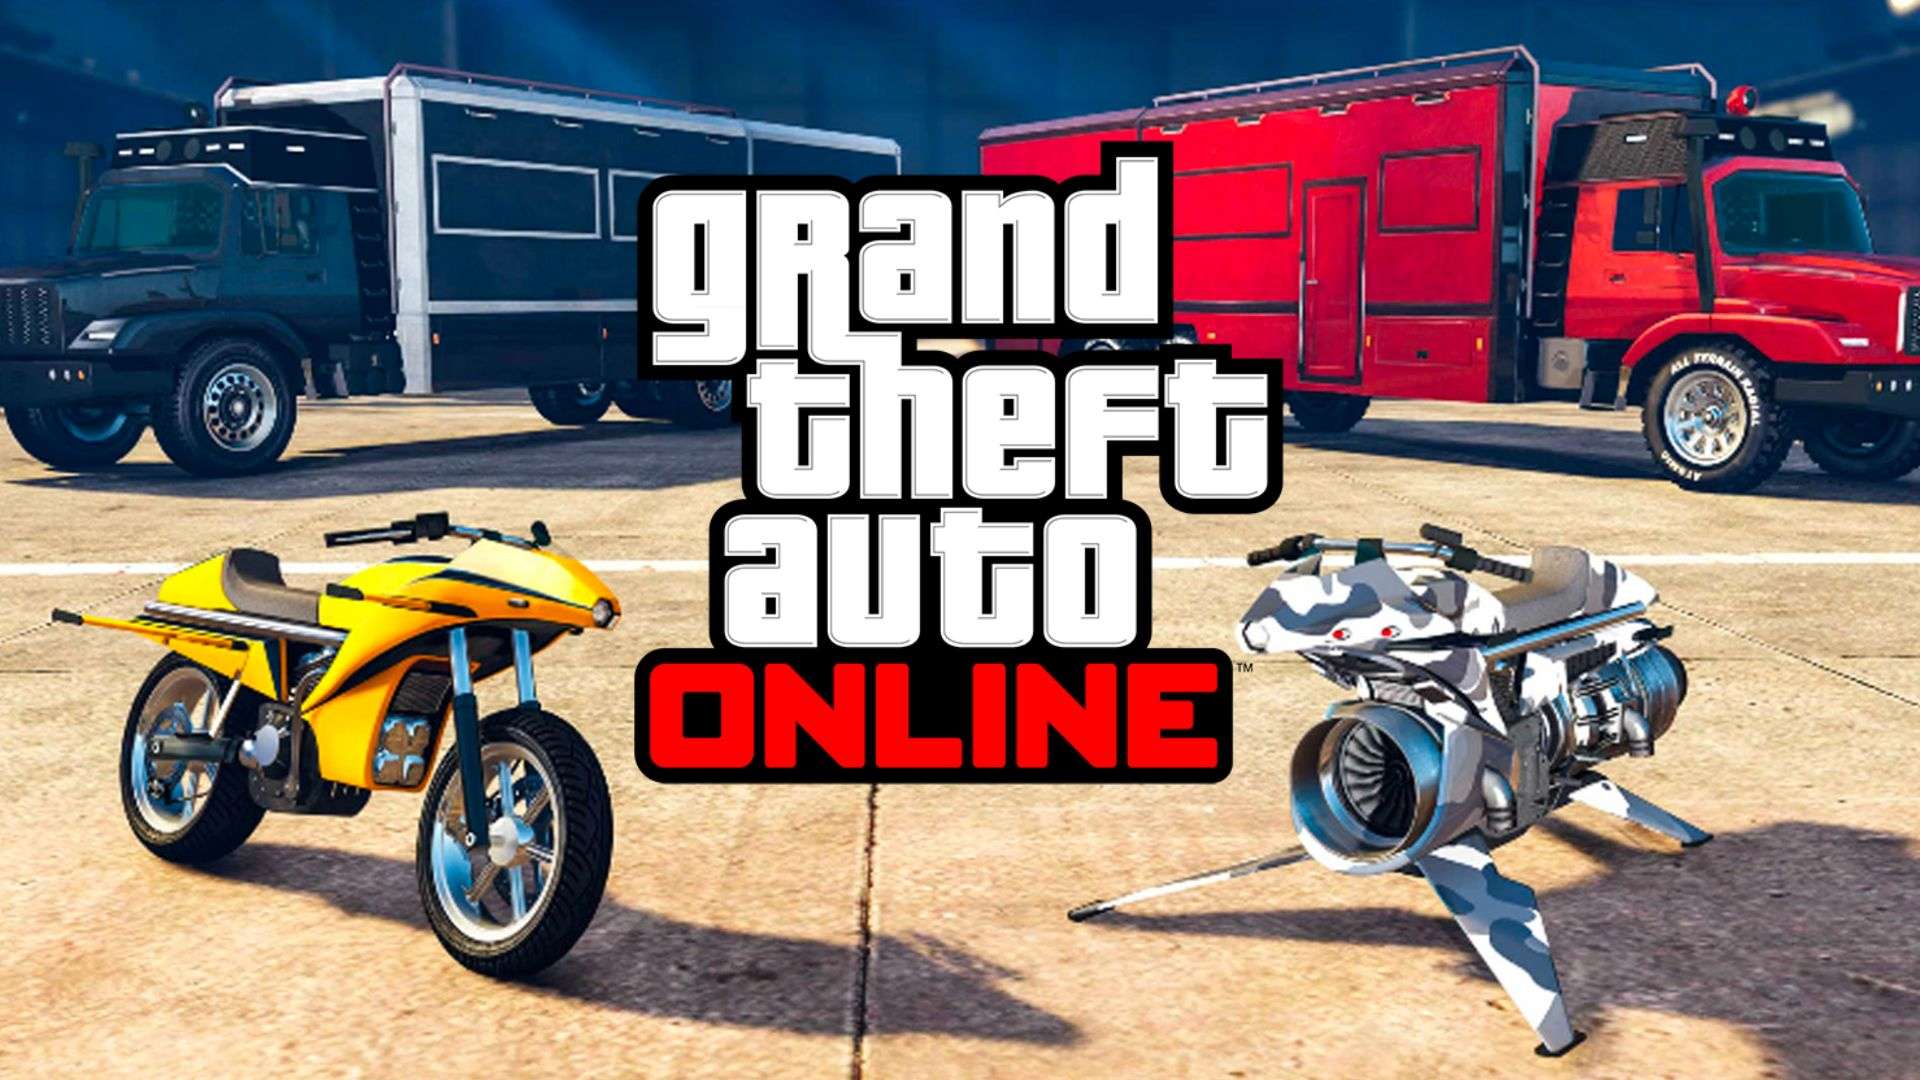 GTA online vehicles parked up and surronded by GTA online logo